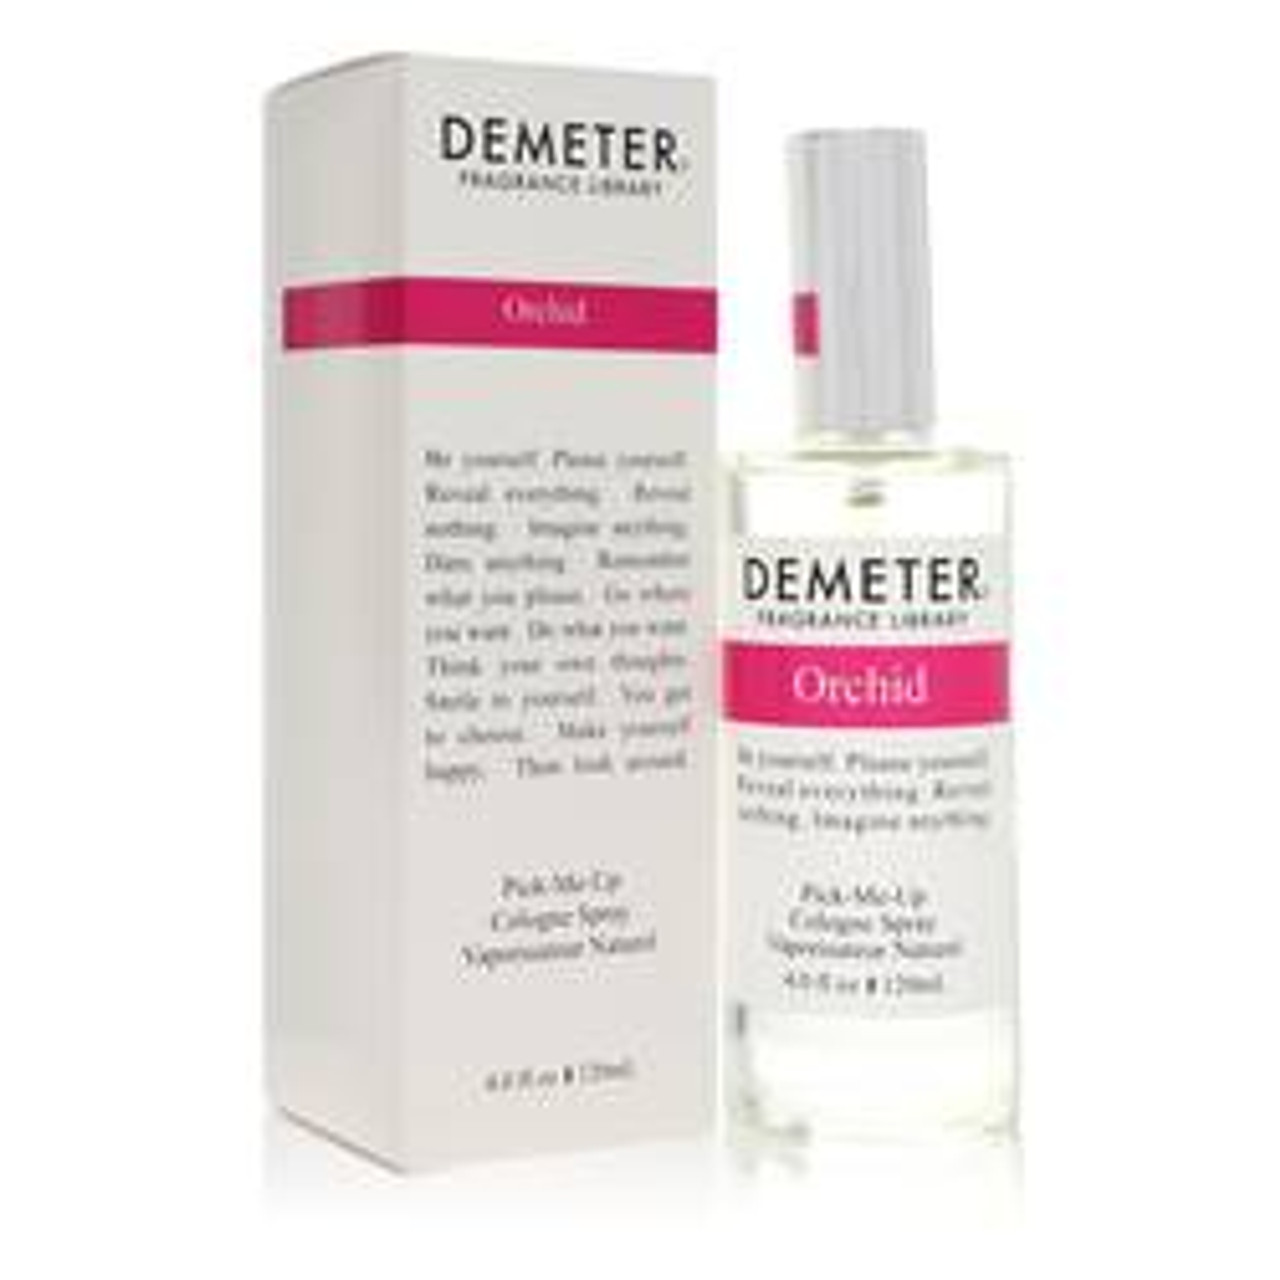 Demeter Orchid Perfume By Demeter Cologne Spray 4 oz for Women - [From 79.50 - Choose pk Qty ] - *Ships from Miami